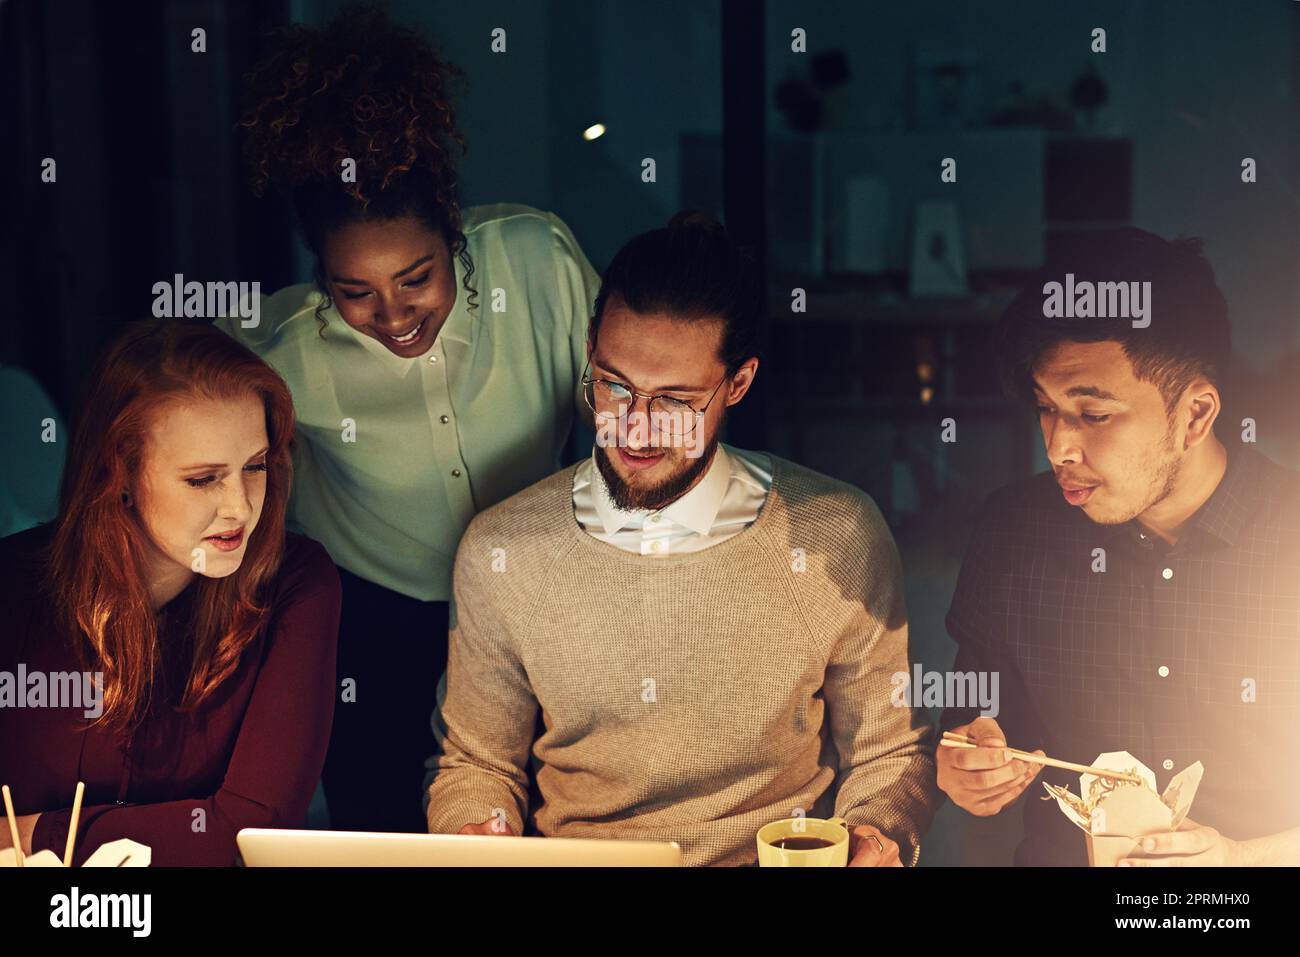 https://c8.alamy.com/comp/2PRMHX0/getting-things-done-on-time-no-matter-the-time-a-business-team-using-a-laptop-together-on-a-night-shift-at-work-2PRMHX0.jpg